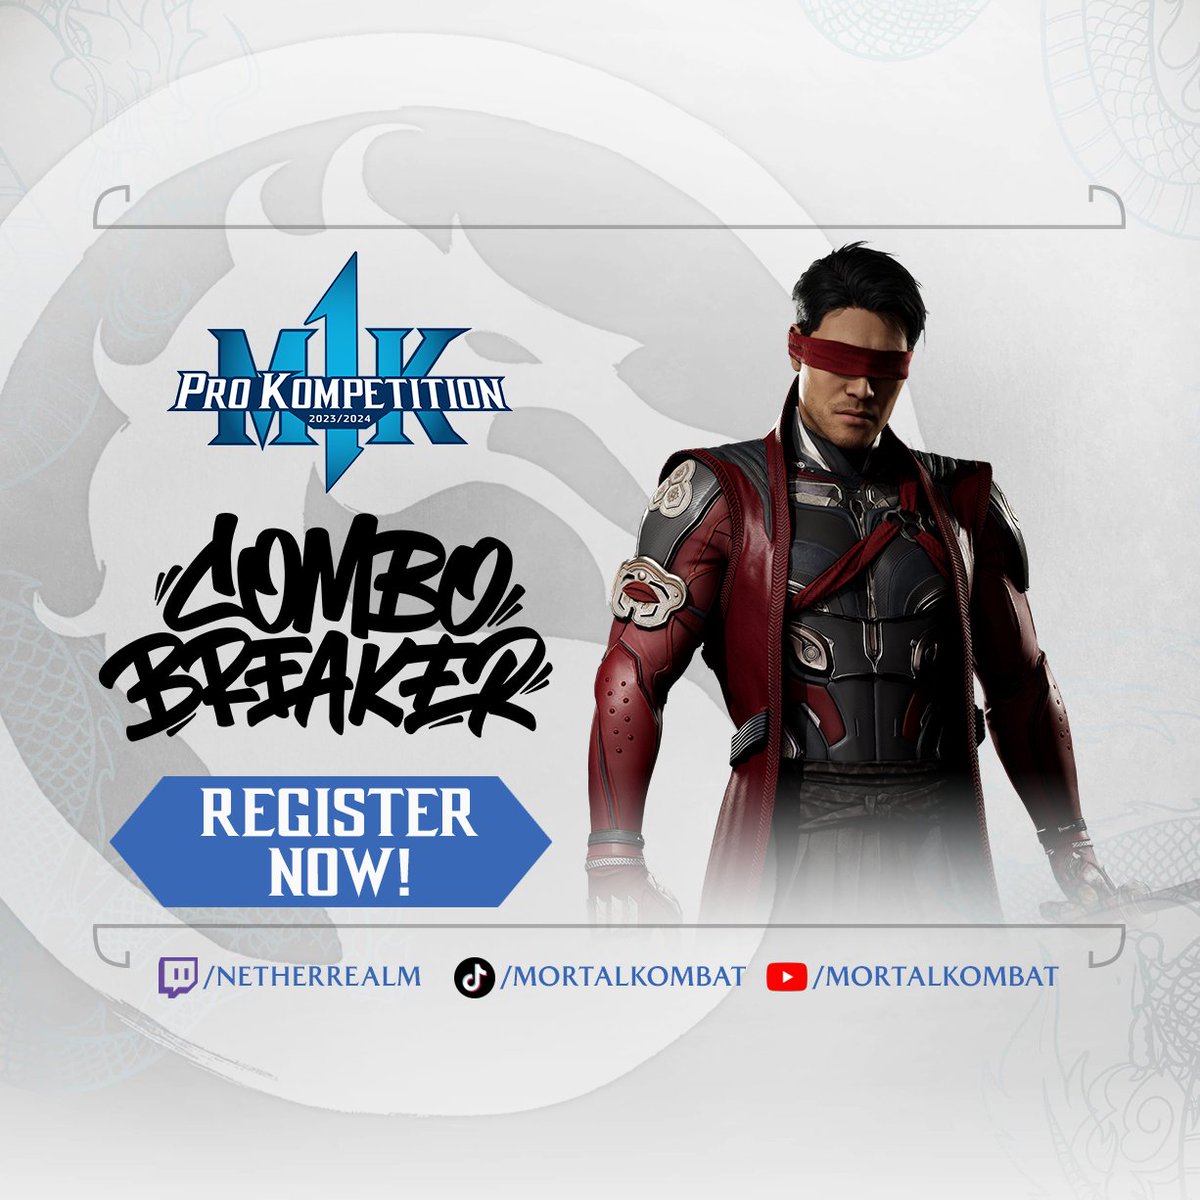 The Road to Mortal Kombat 1 Pro Kompetition's Final Kombat ends at CB2024! With a $10,000 pot bonus from @NRSEsports, this one will be a bloodbath. Register today at start.gg/combobreaker and claim the Global Leaderboard Points you need to earn your trip to Final Kombat!